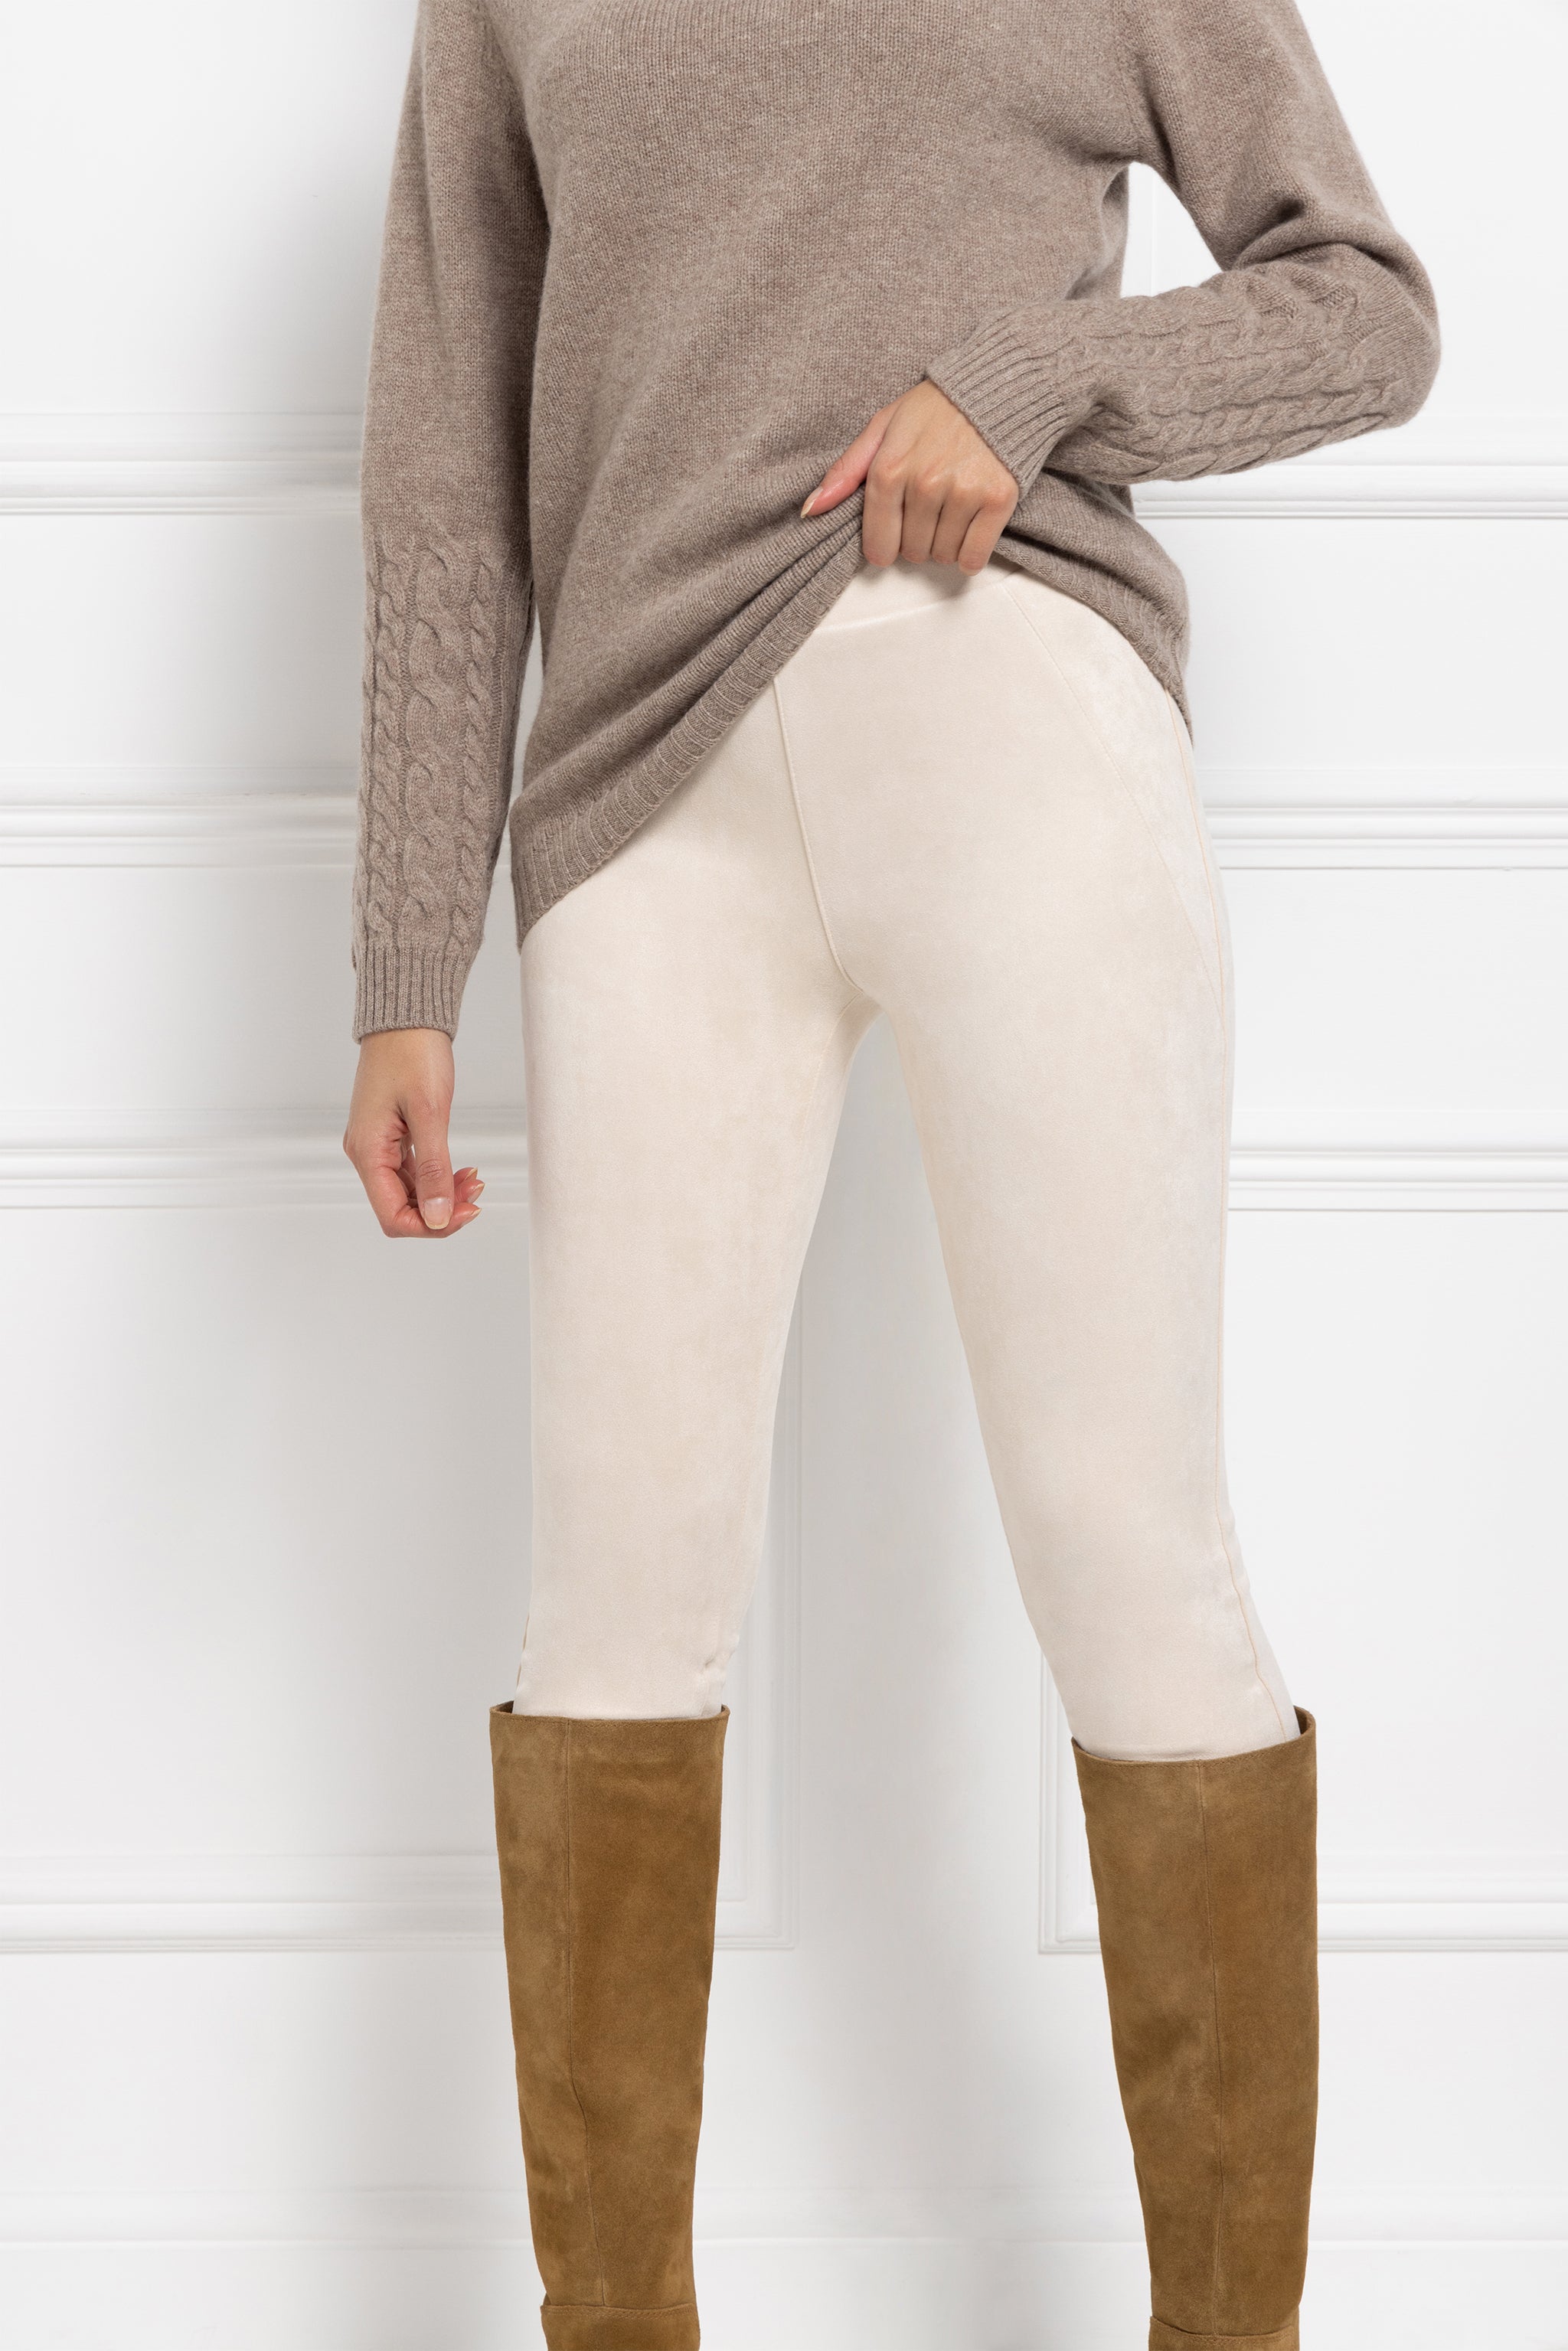 Suede Leggings For the Win – tayhage